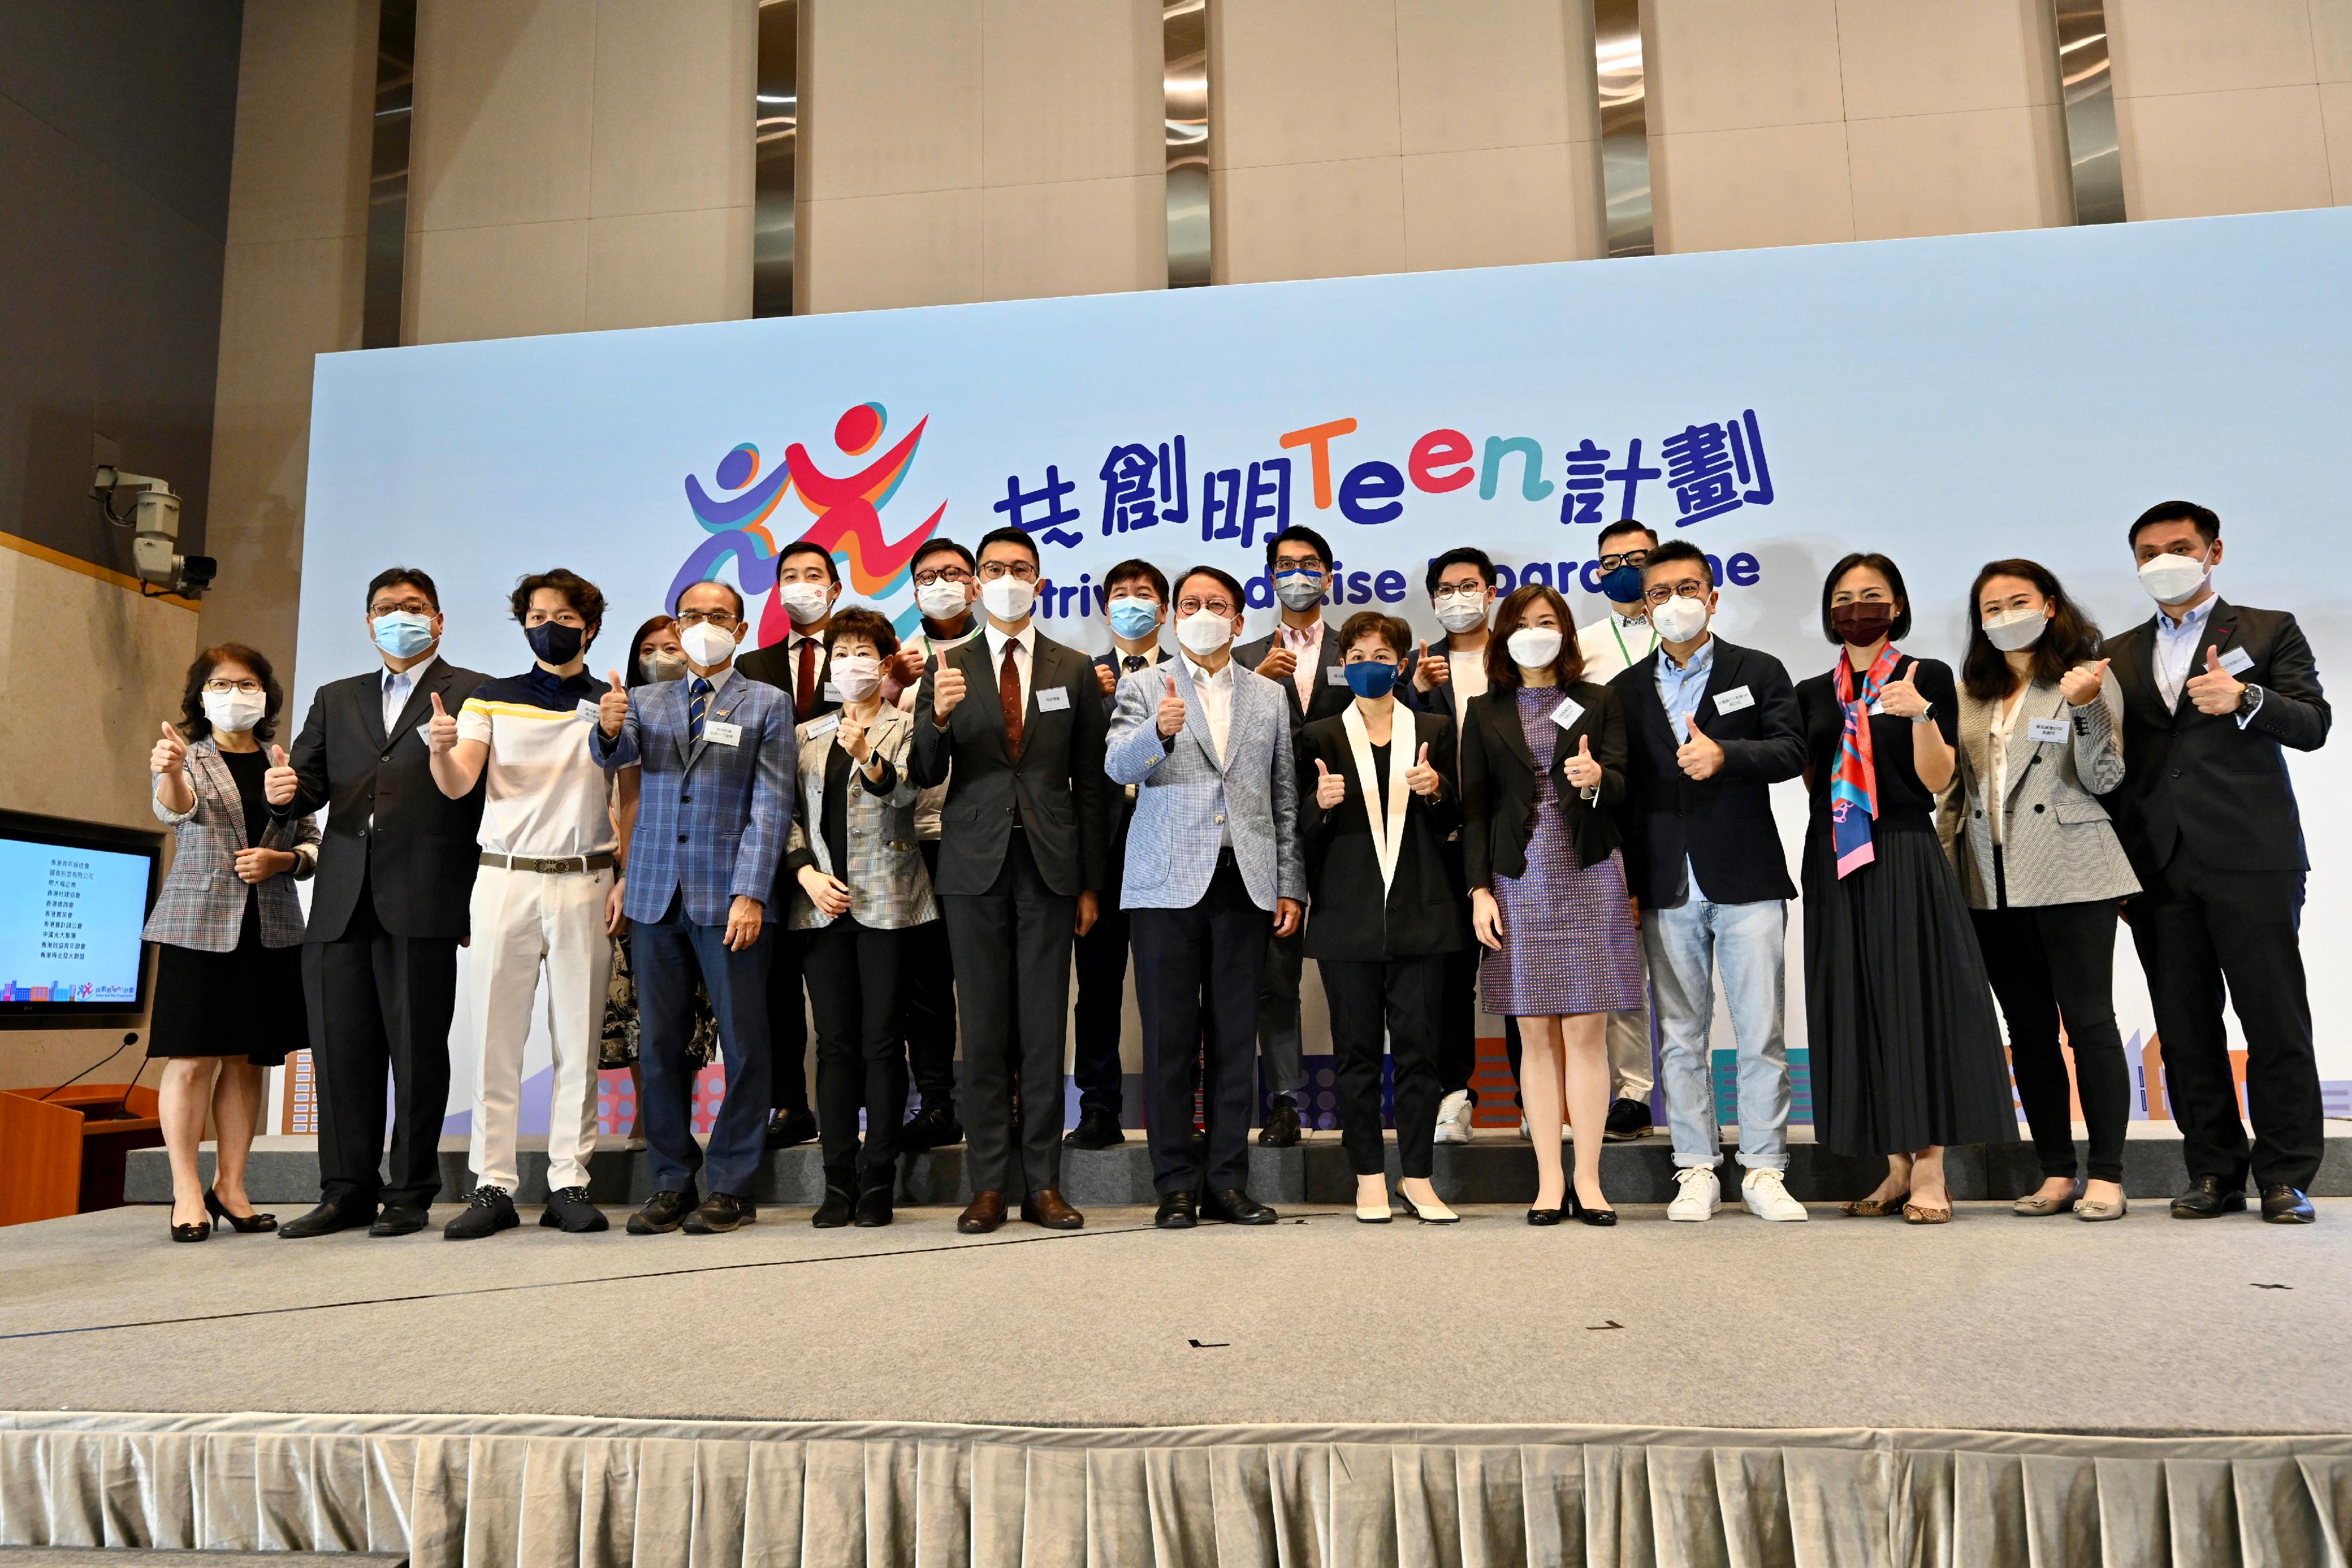 Chief Secretary for Administration, Mr Chan Kwok-ki, attended the Kick-off Ceremony and Orientation Day of the Strive and Rise Programme today (October 29). Photo shows Mr Chan (first row, centre) in a photo with representatives of the enterprises and organisations that support the Programme.